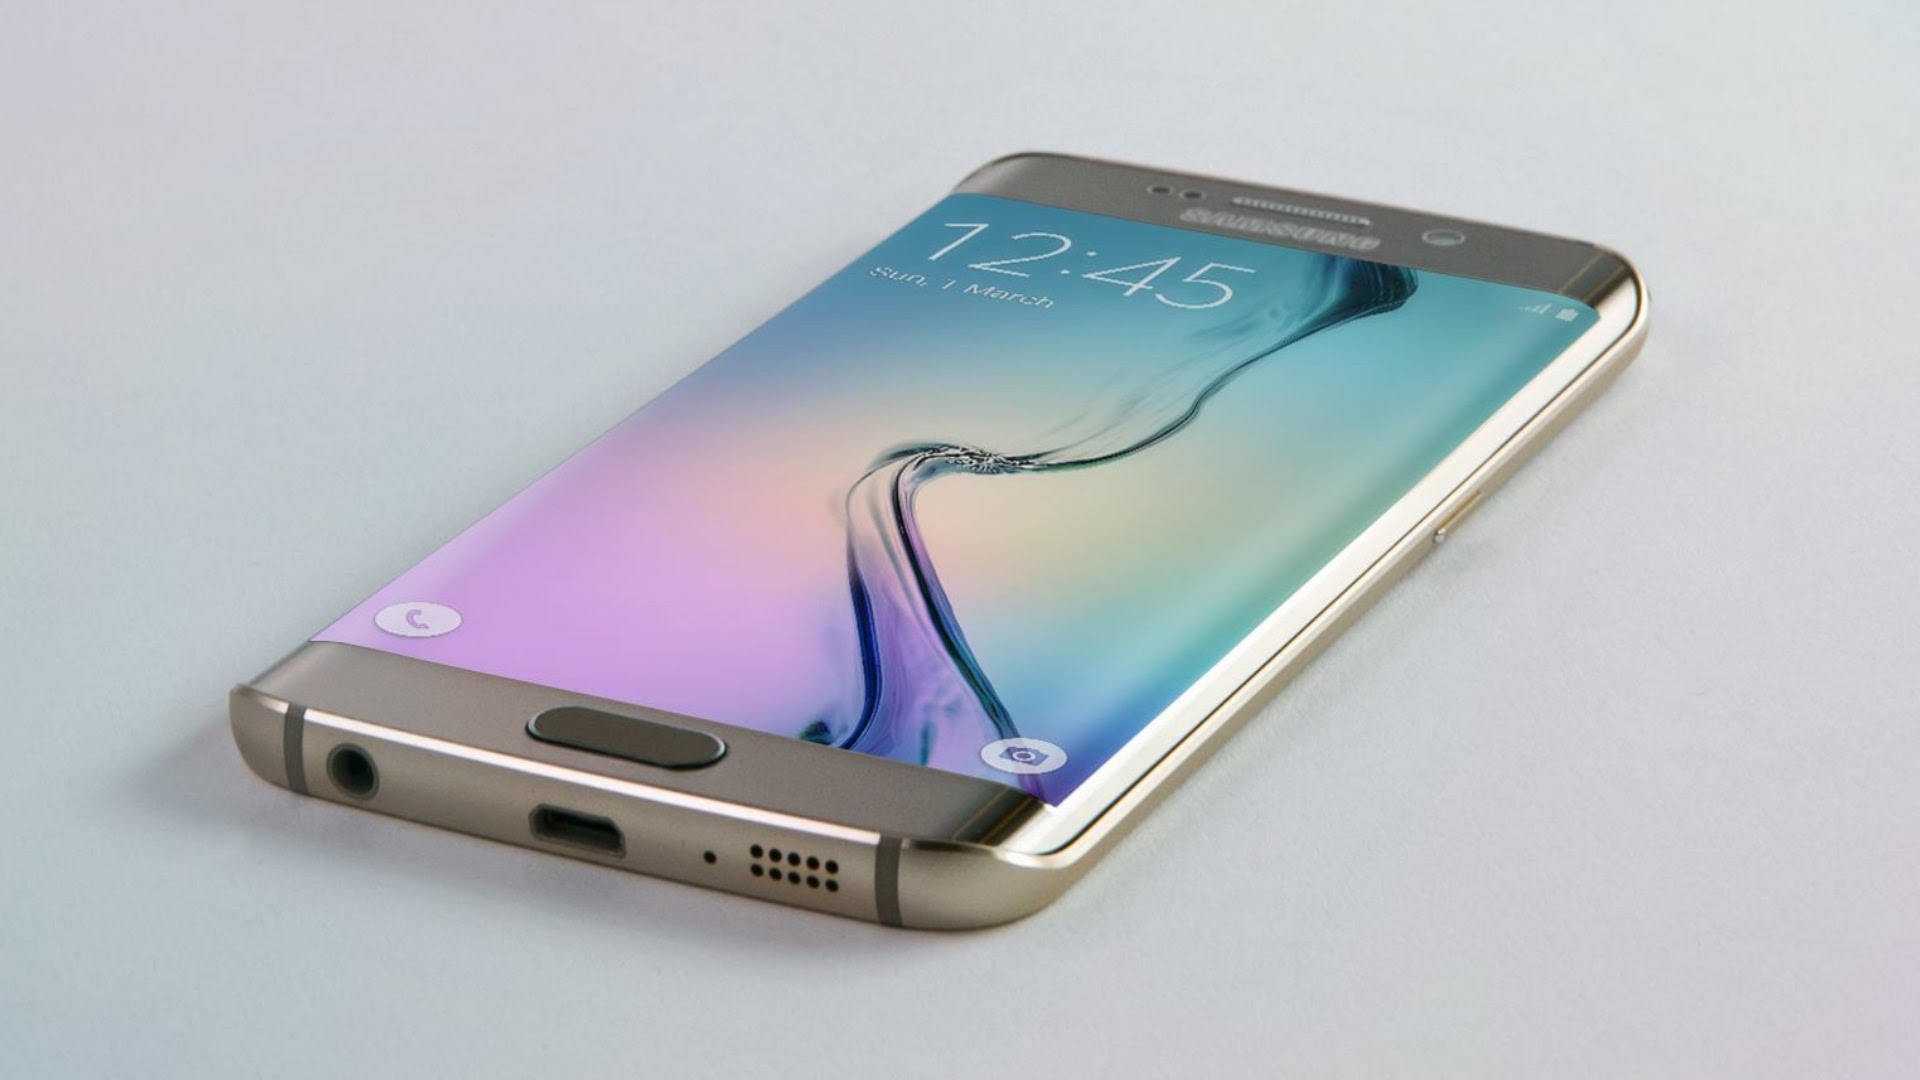 Galaxy S6 and S6 edge devices get Nougat update in the T-Mobile 7